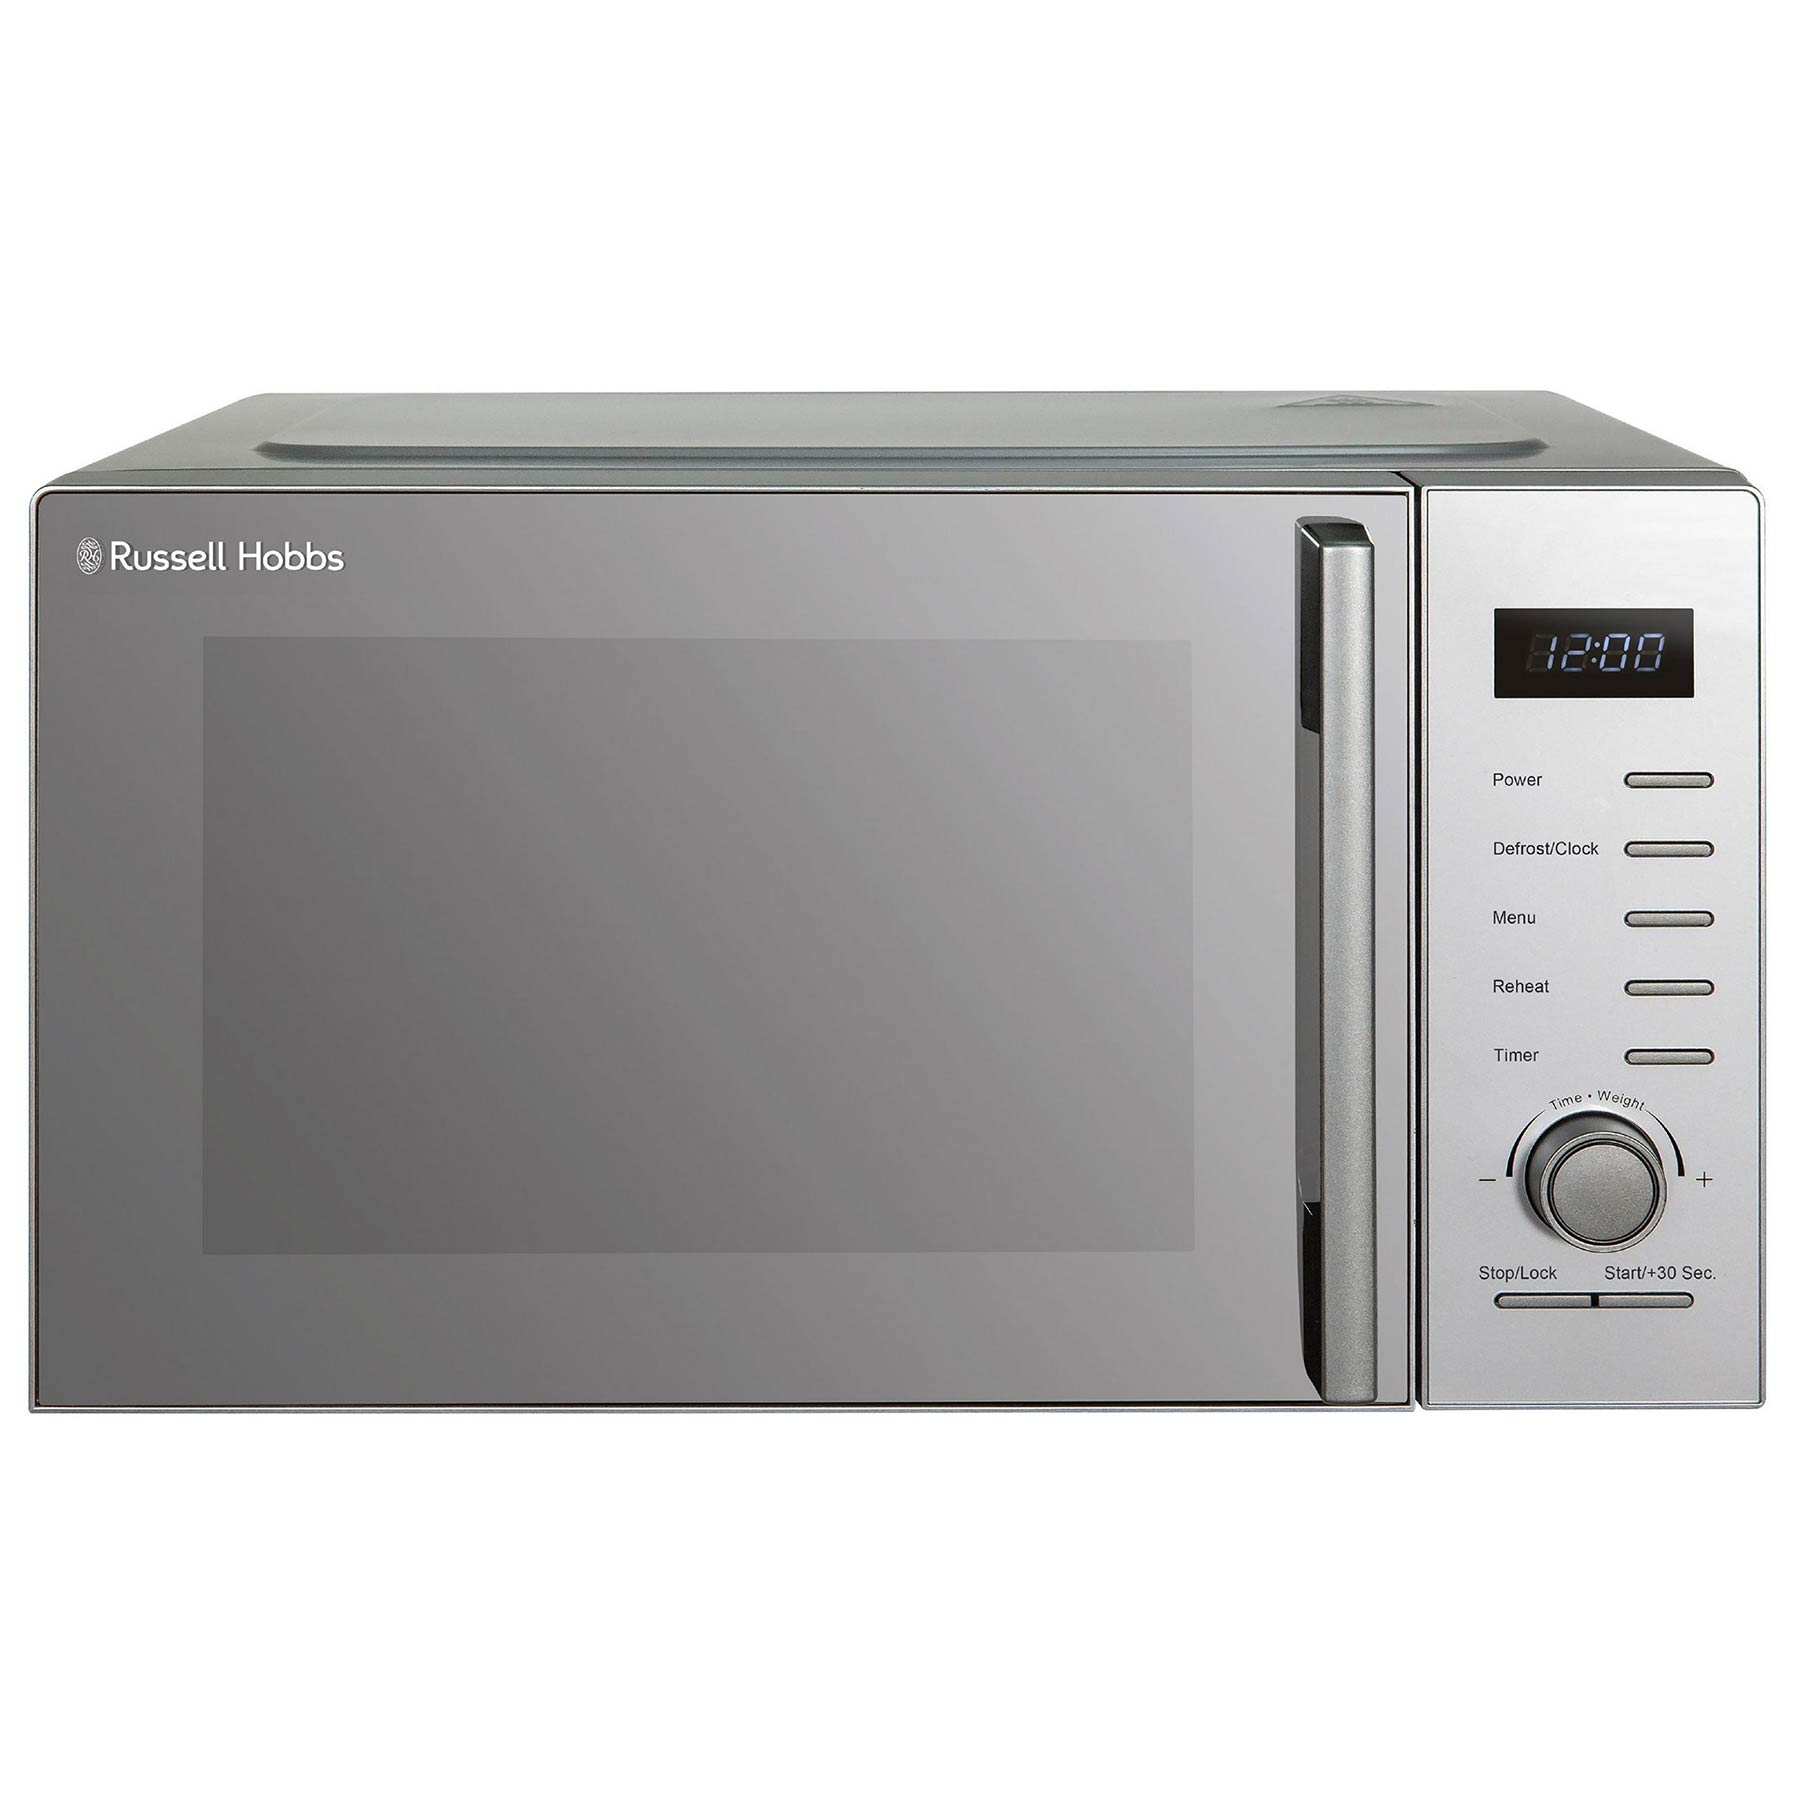 Russell Hobbs RHM2348S Microwave Oven in Silver 23L 900W